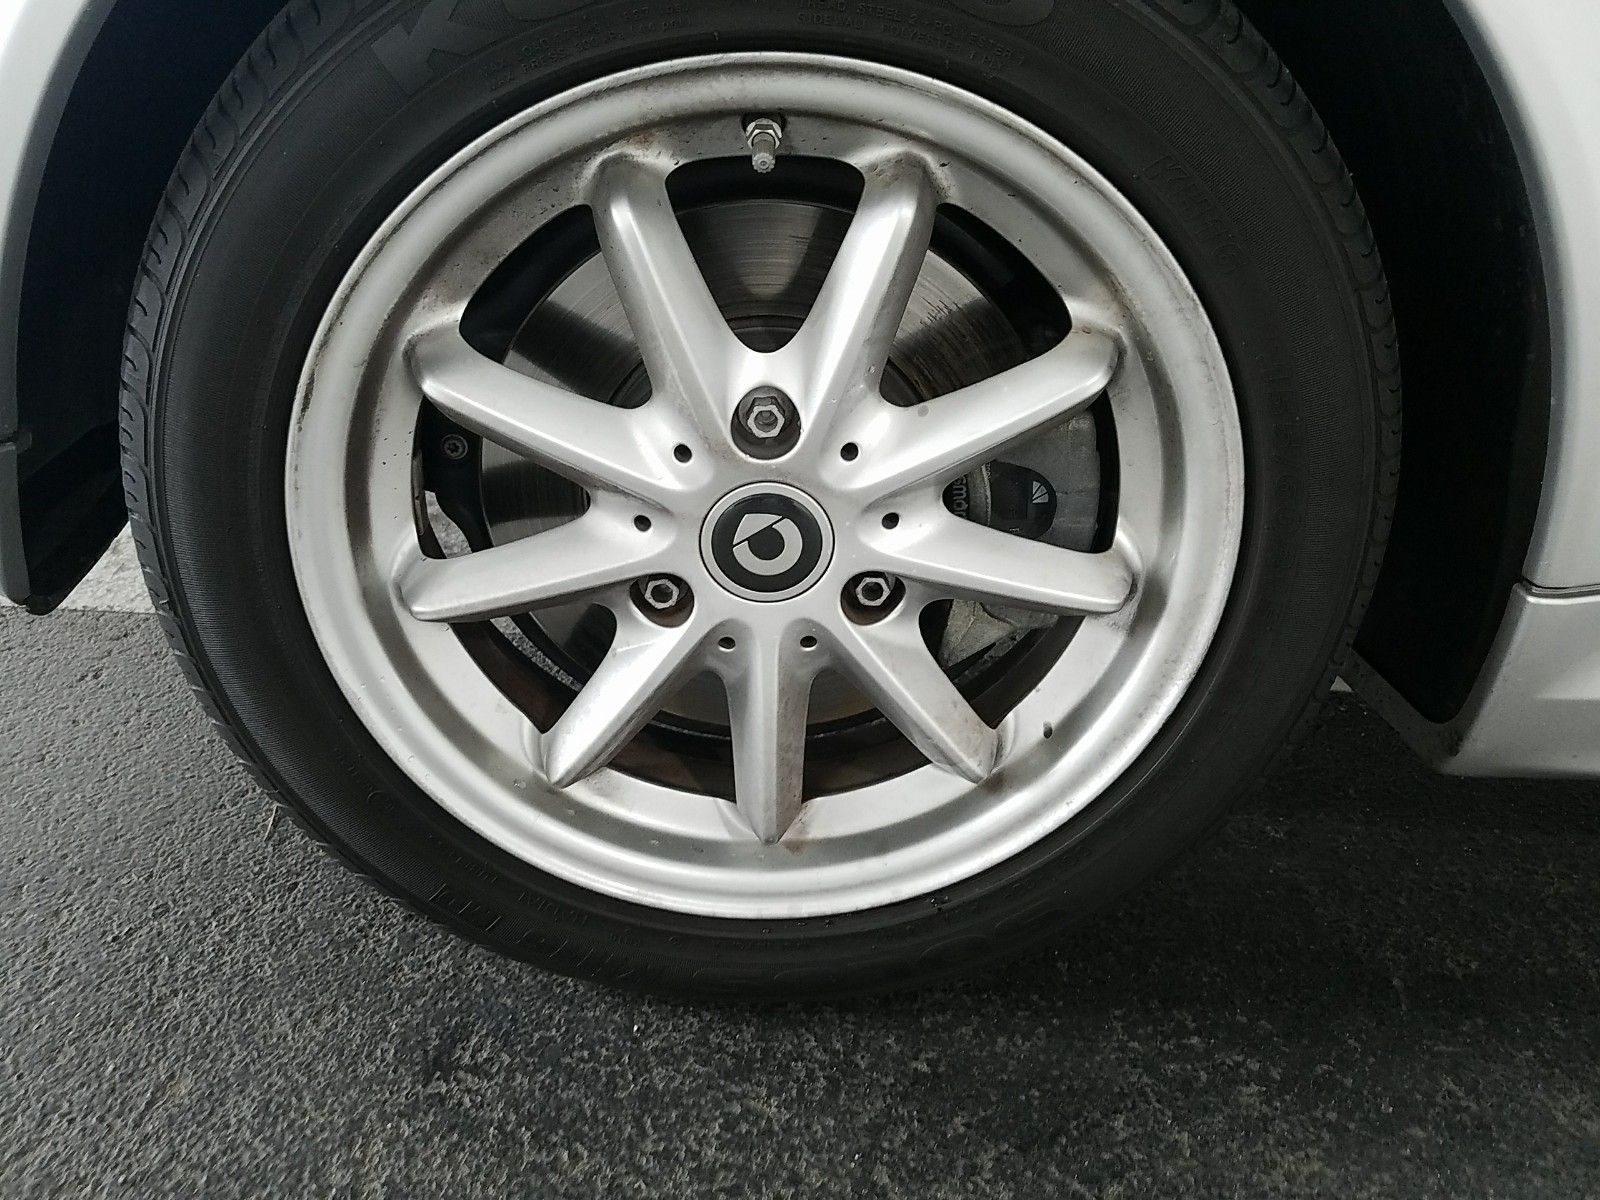 Overall Picture - Wheel